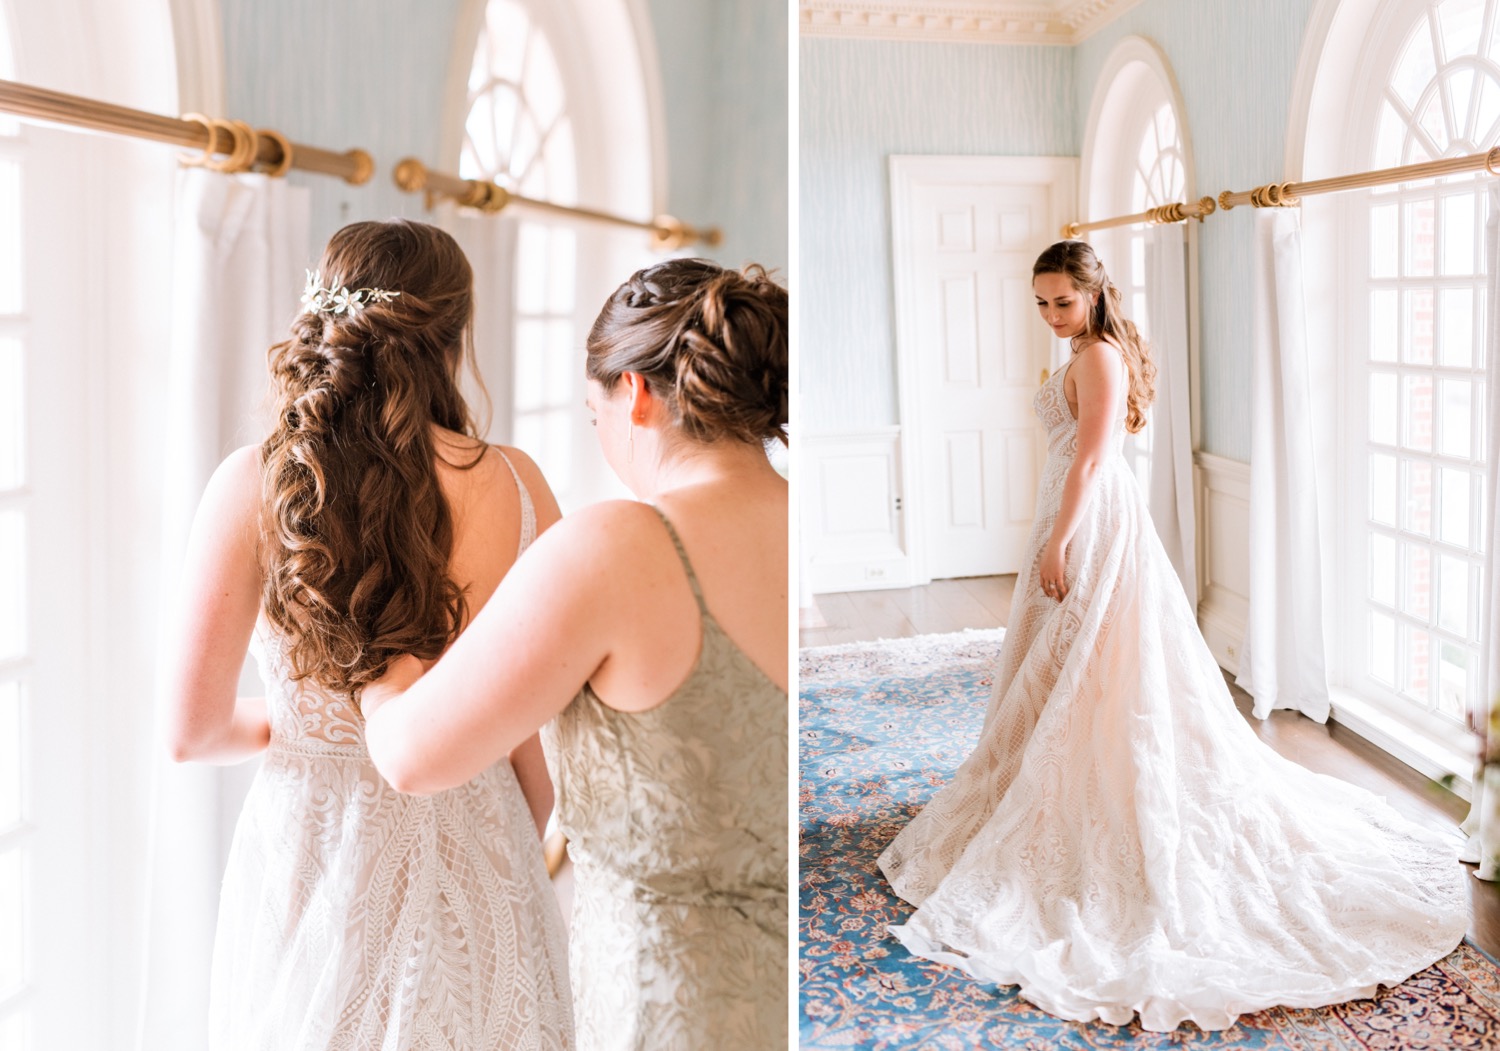 Bride gets ready before she says "I do" in Richmond Virginia